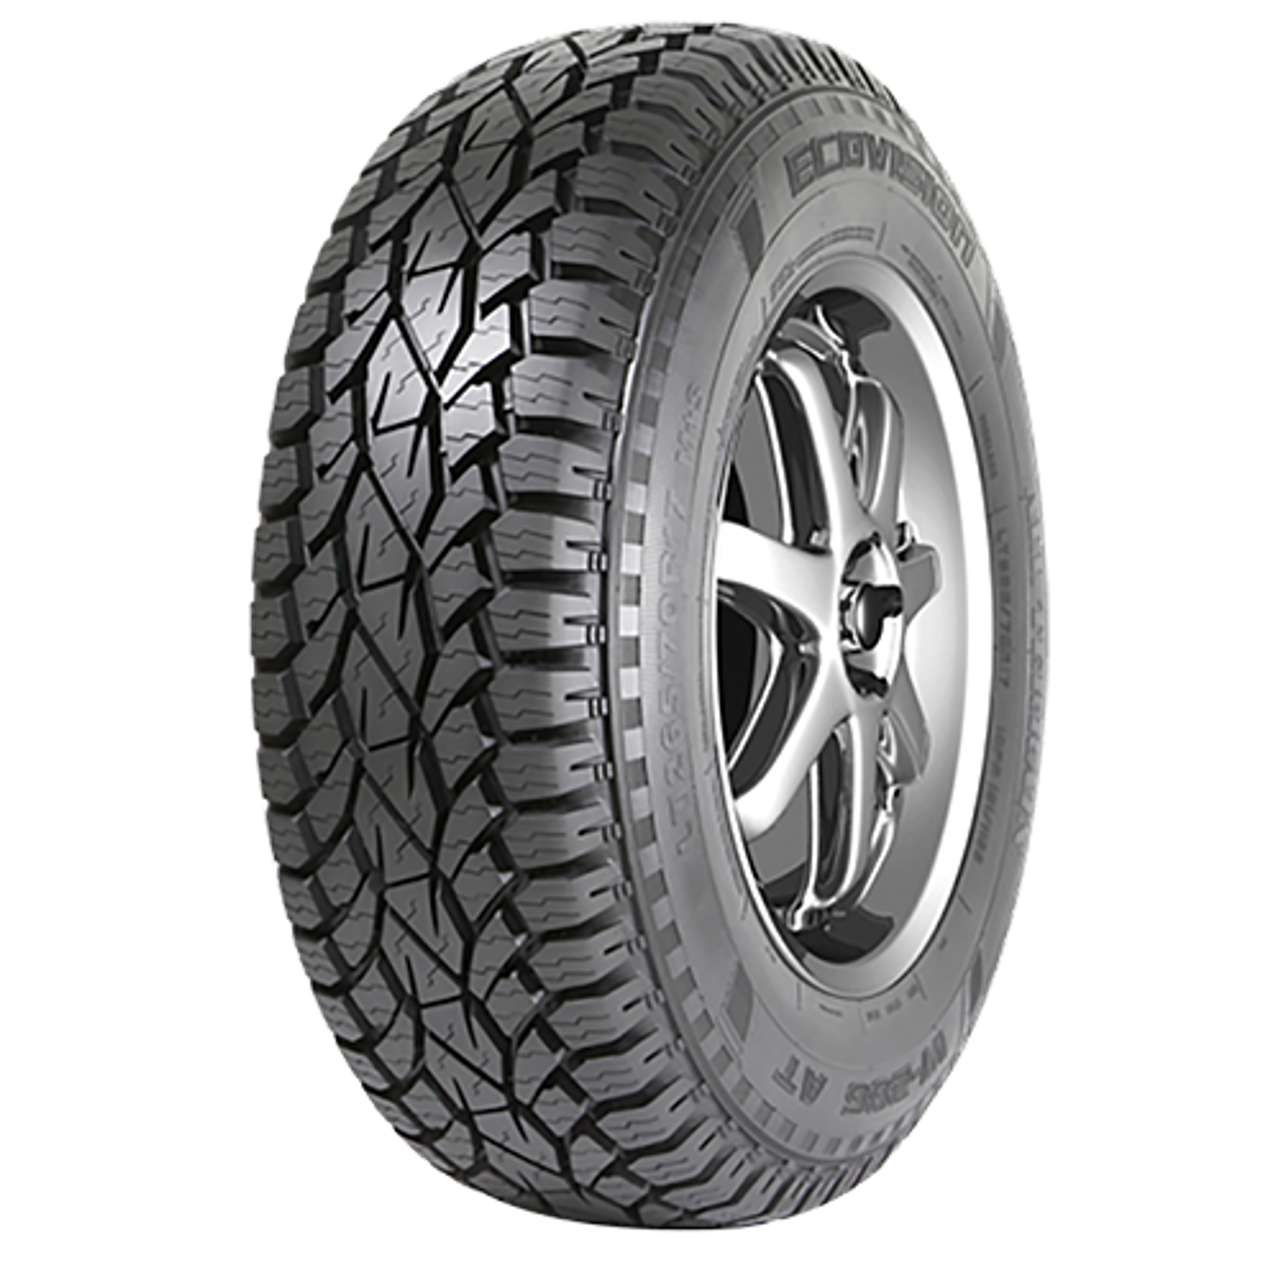 ECOVISION ECOVISION VI-286 AT 235/85R16 120R BSW